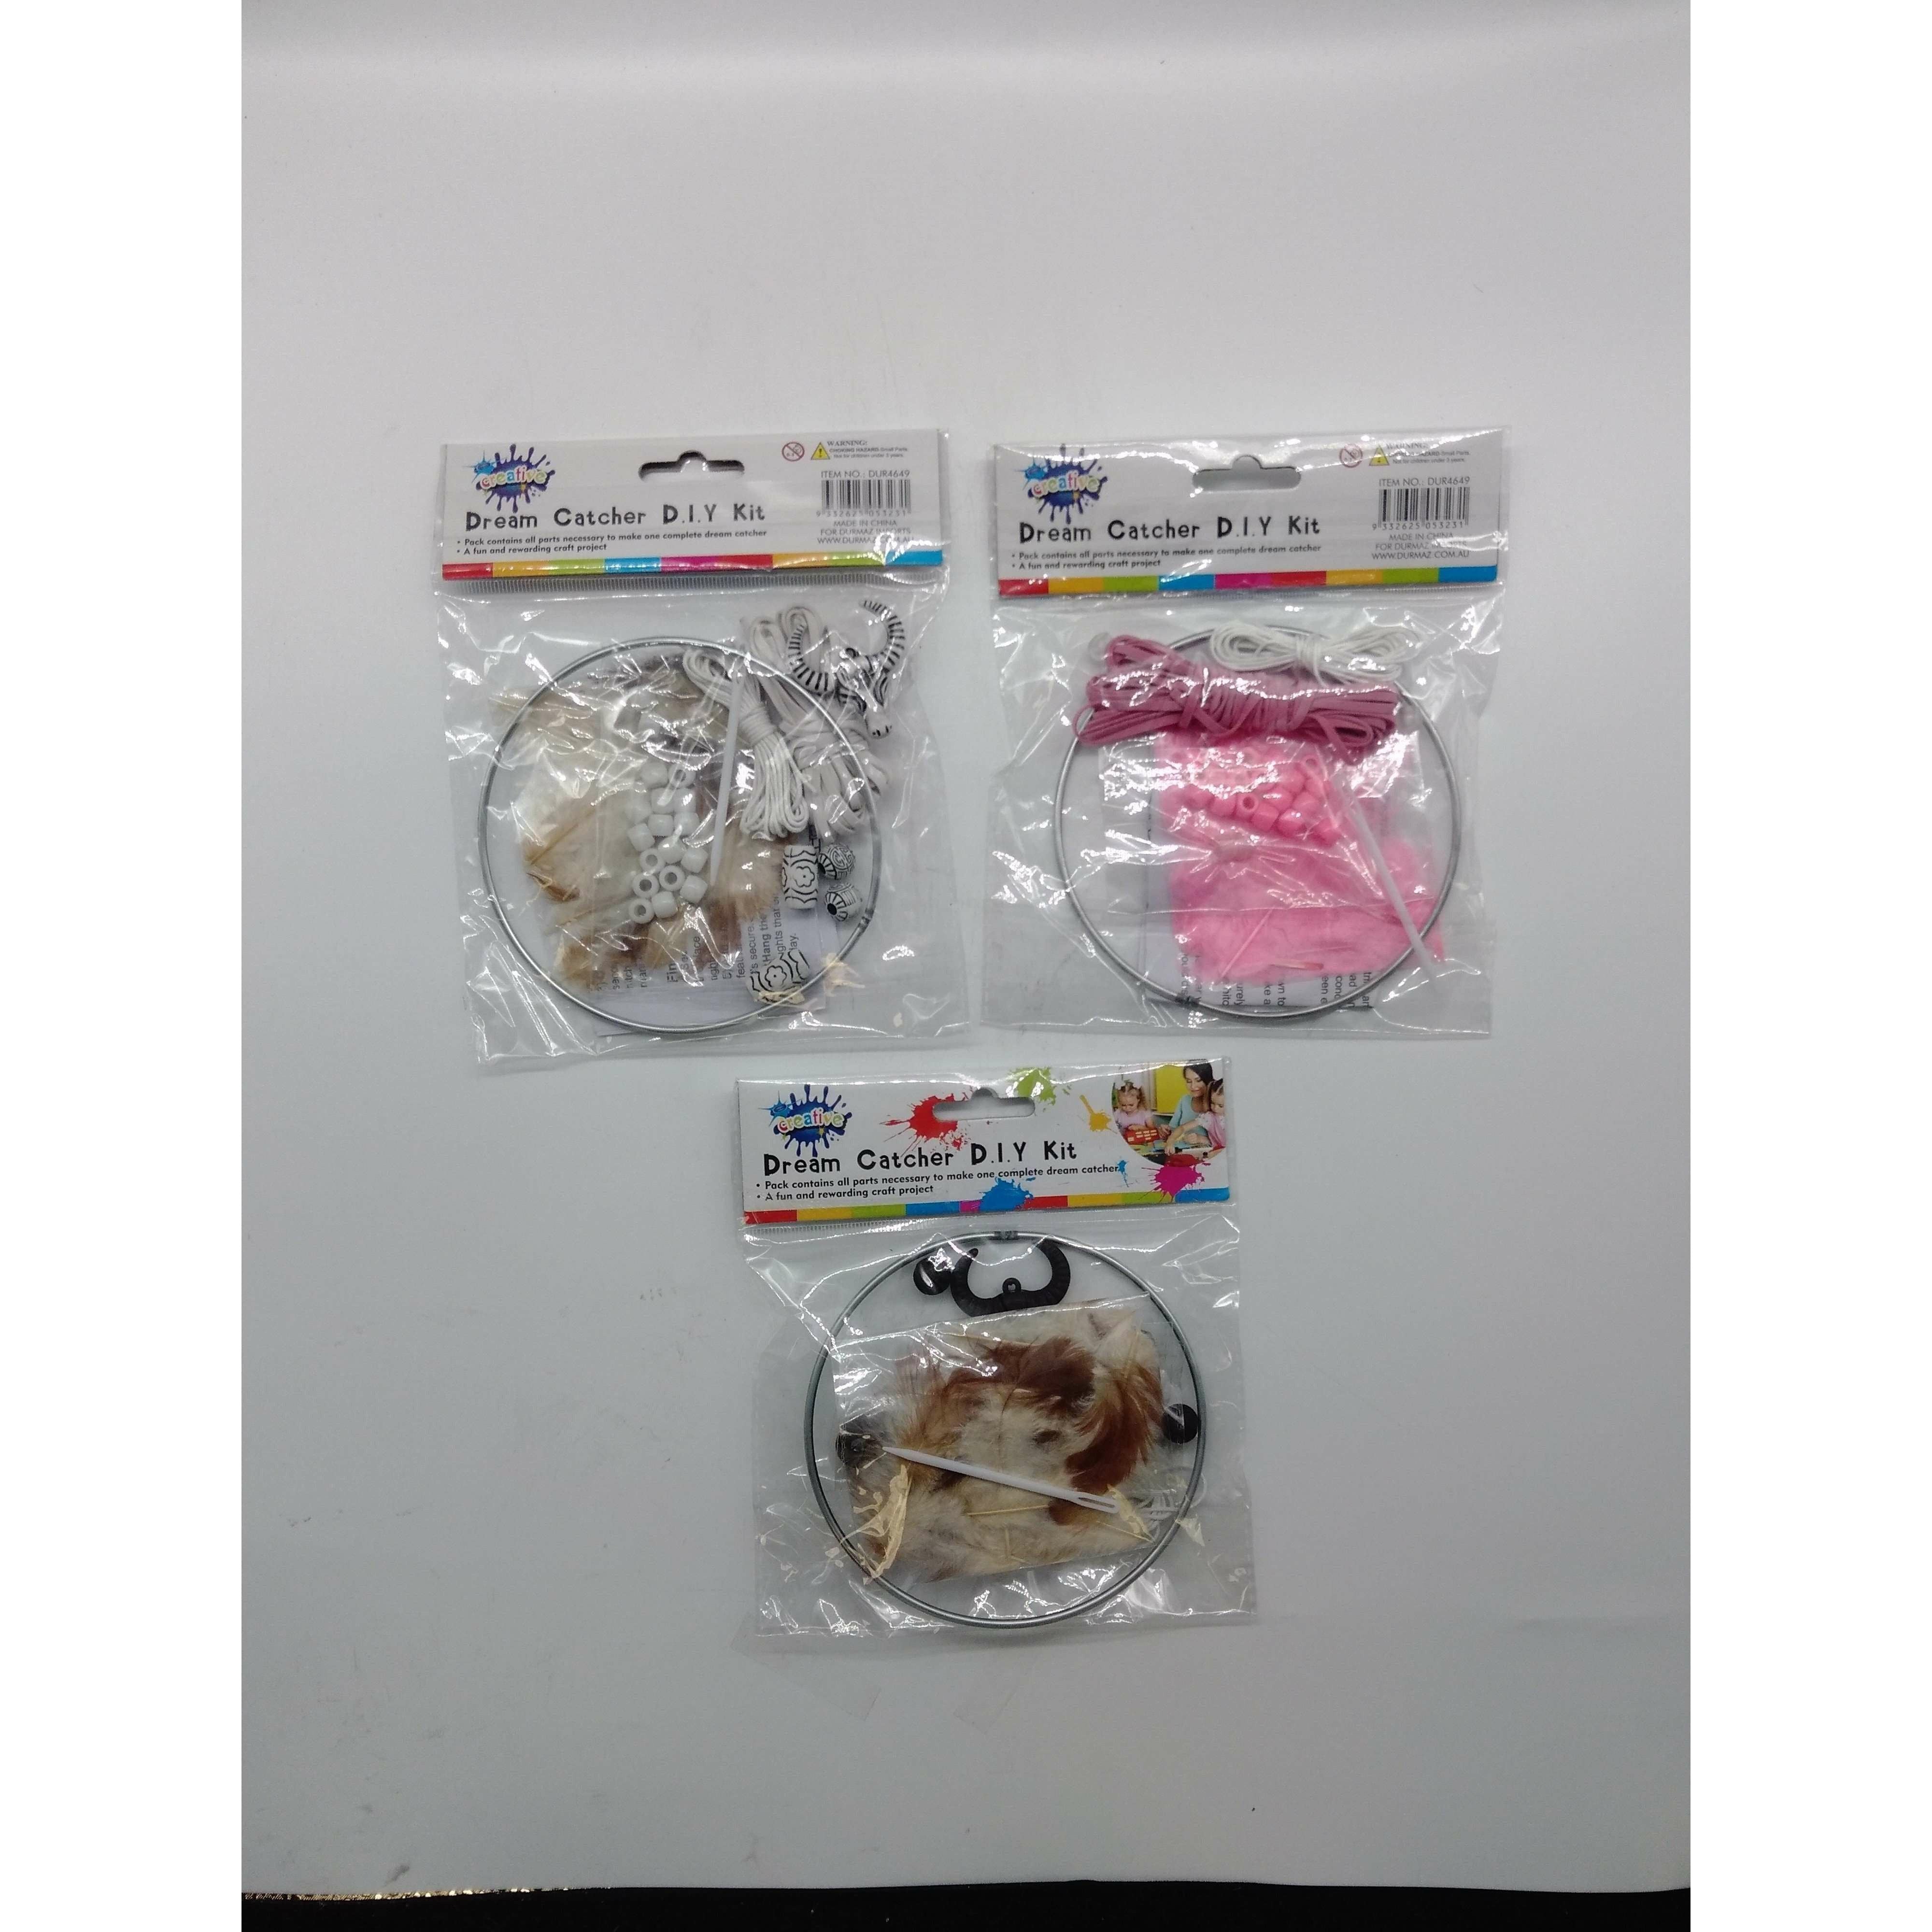 Buy Cheap art & craft online | Dream Catcher D.I.Y Kit|  Dollars and Sense cheap and low prices in australia 